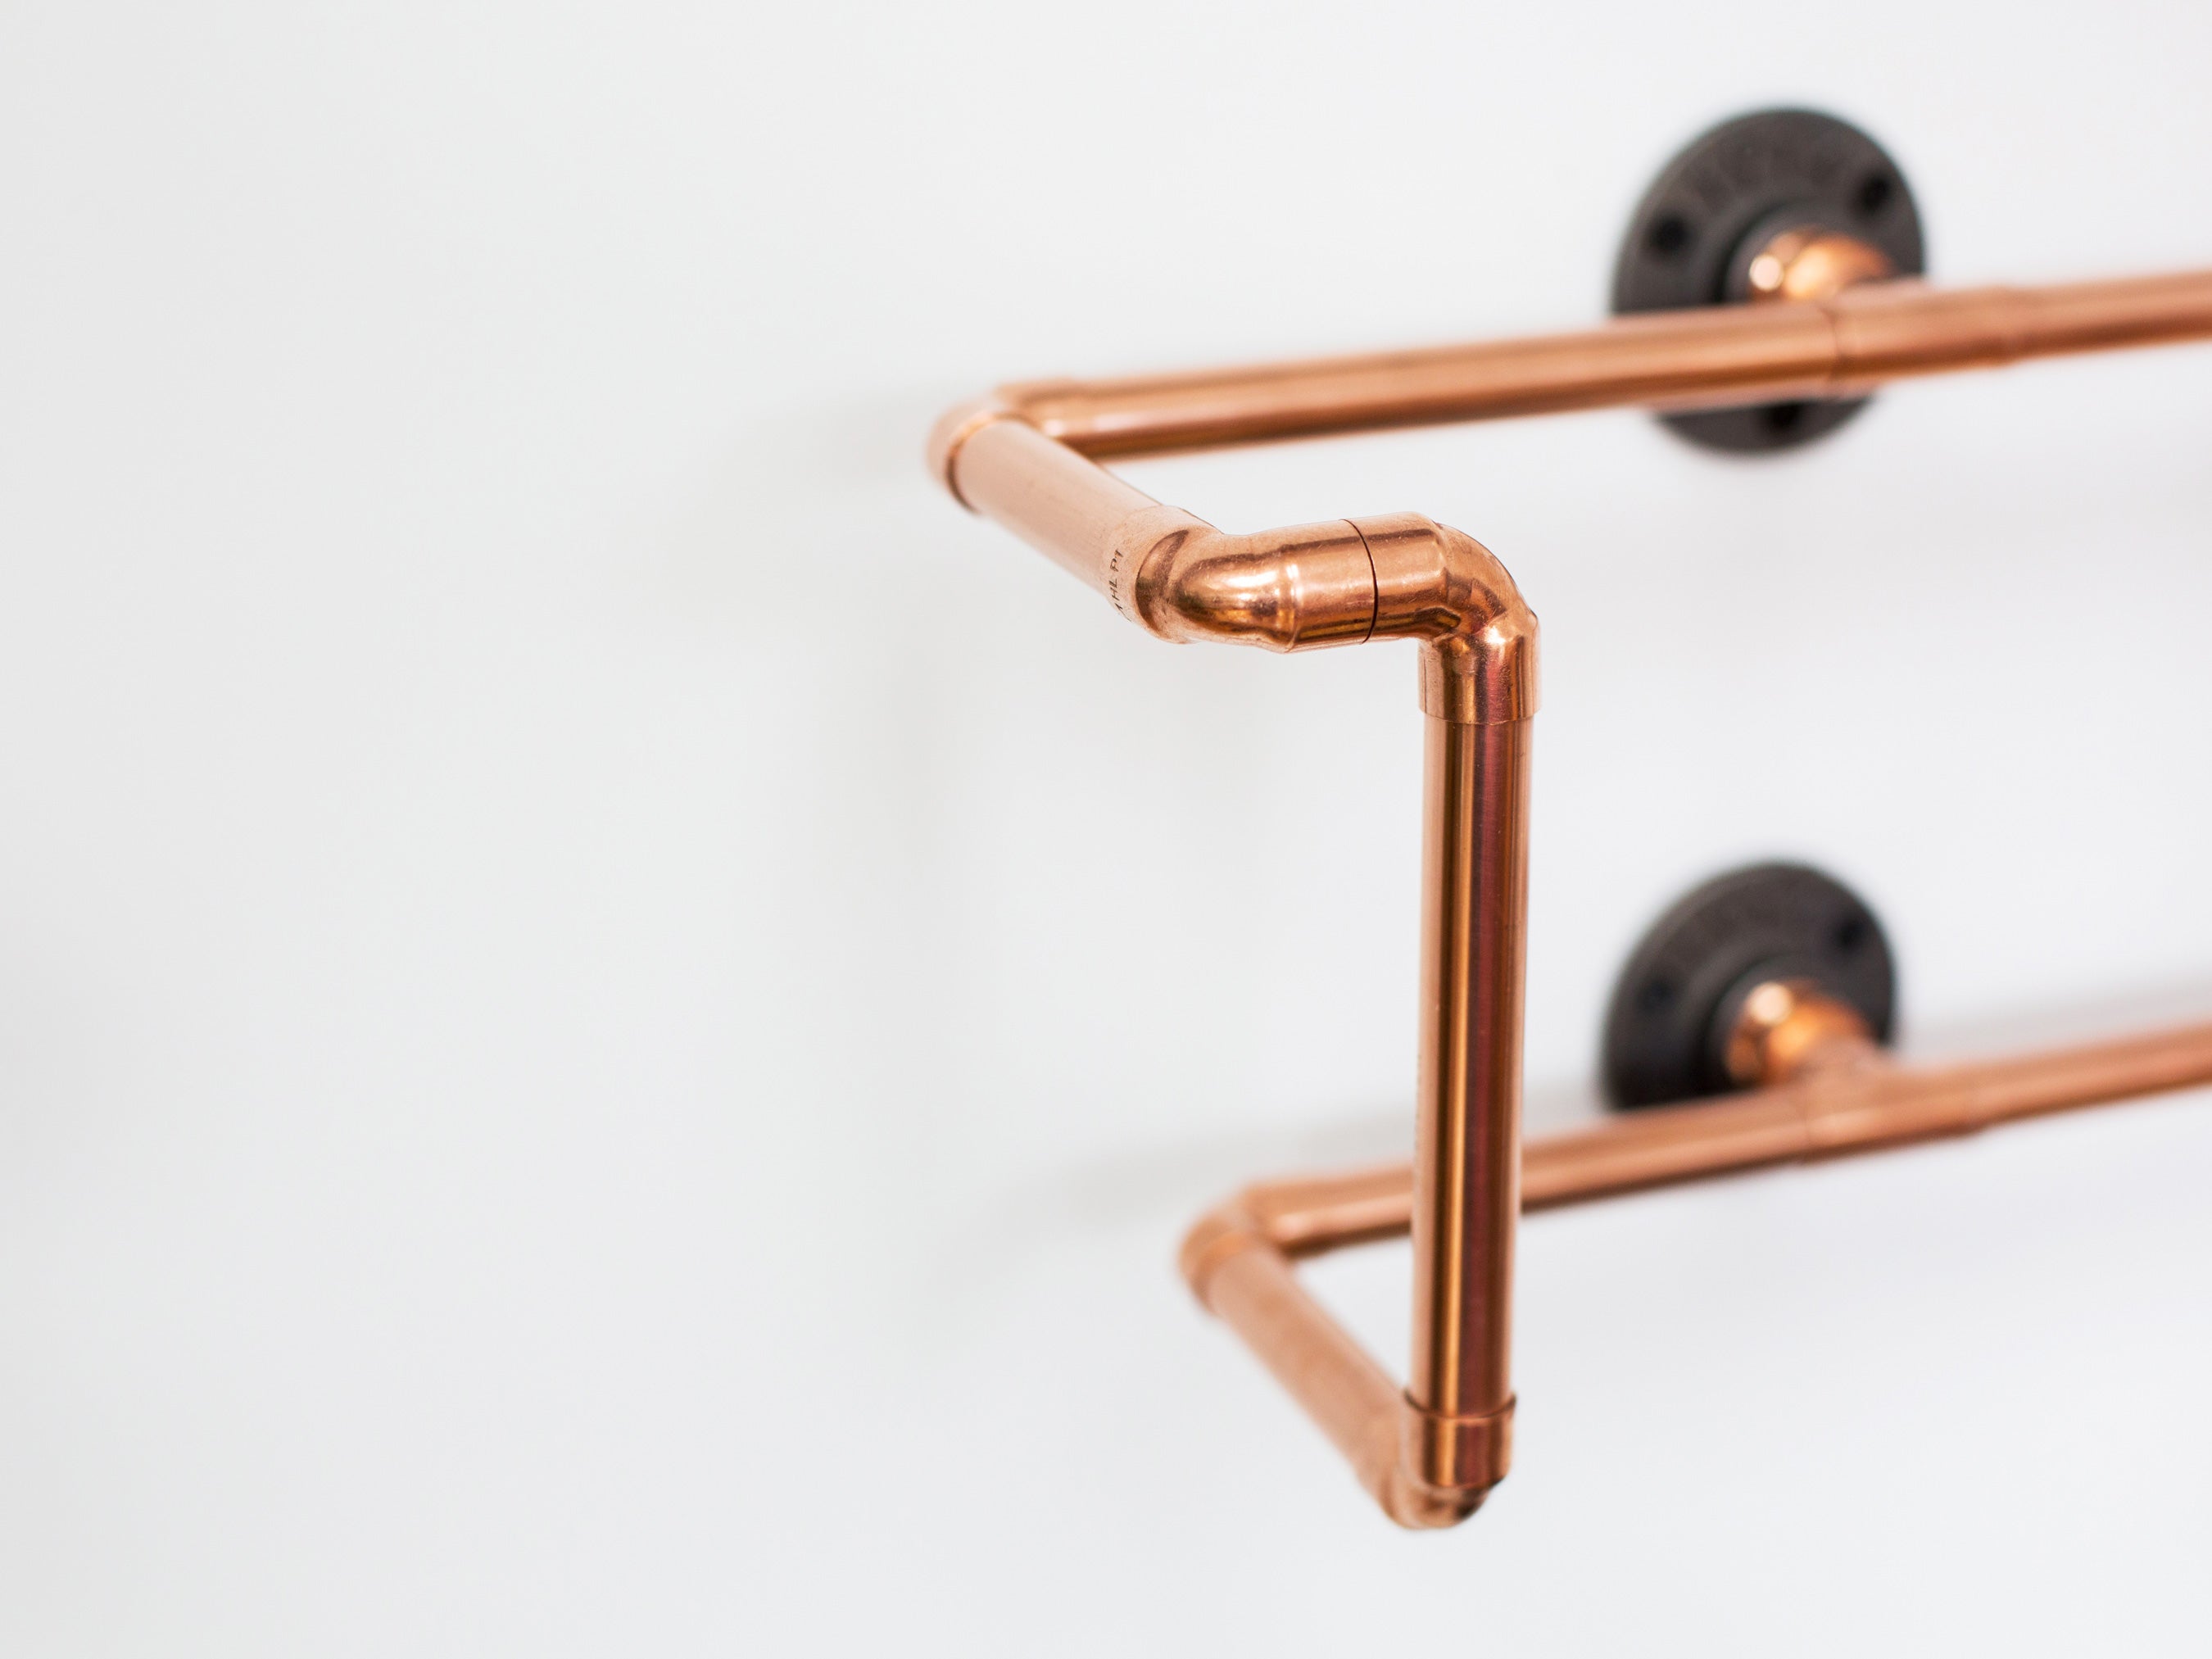 Vinyl Record Holder Handmade With Industrial Copper and Chrome